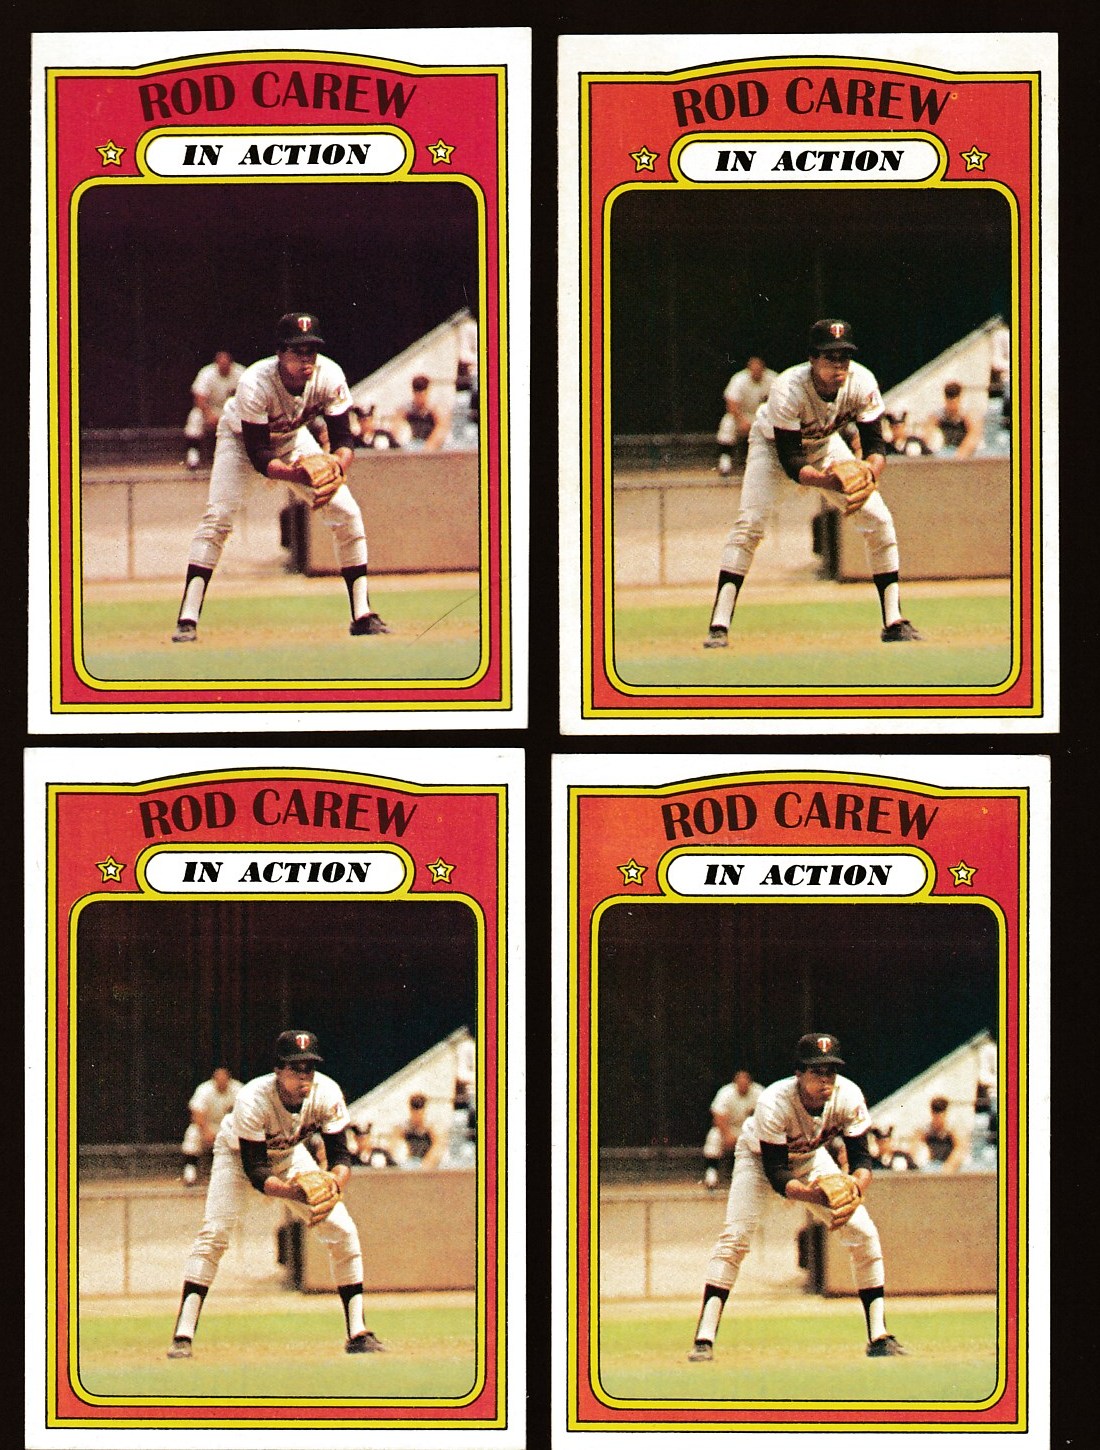 1972 Topps #696 Rod Carew In-Action SCARCE HIGH # (Twins) Baseball cards value